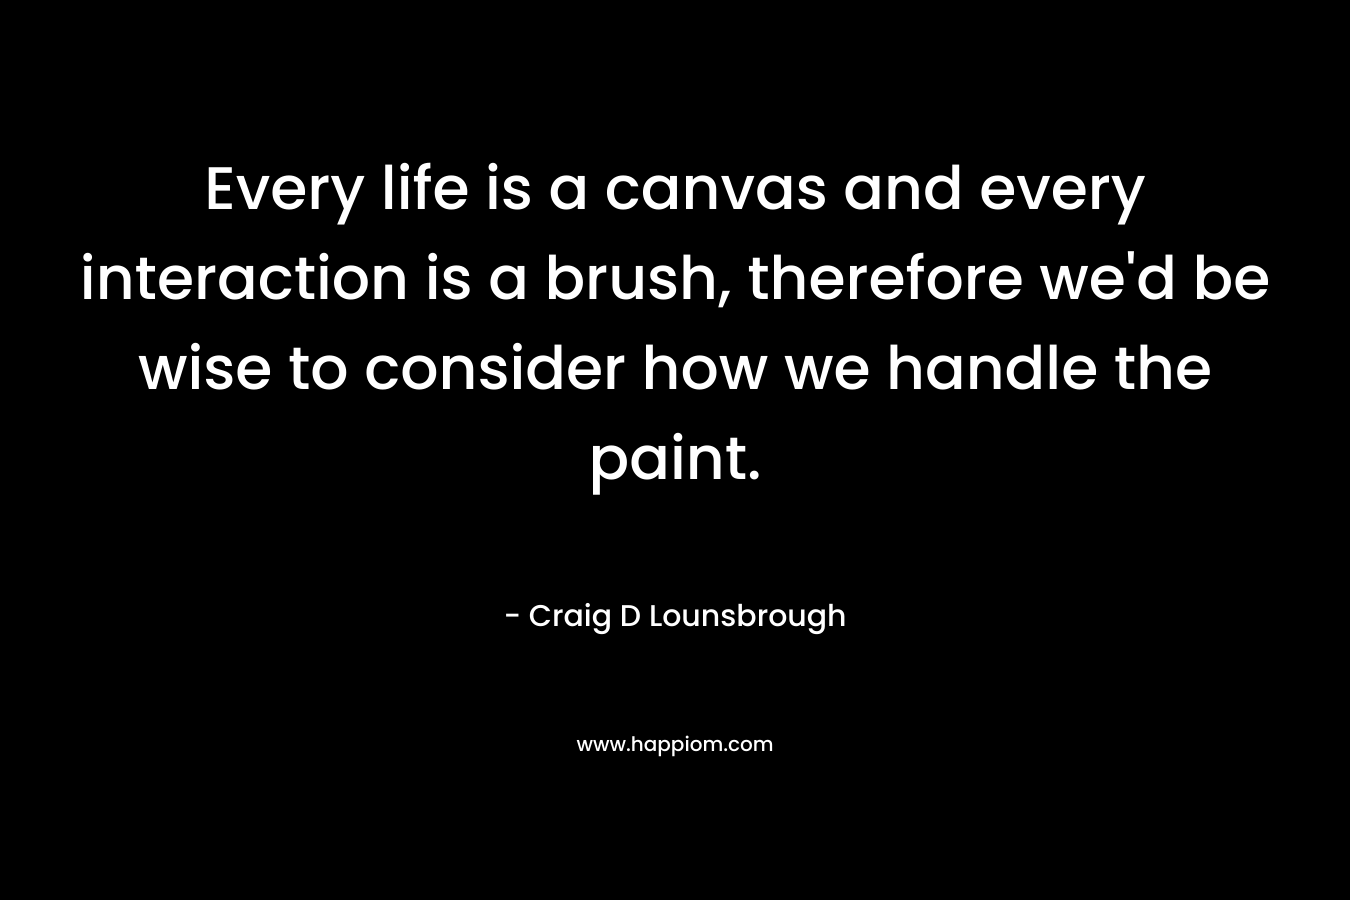 Every life is a canvas and every interaction is a brush, therefore we’d be wise to consider how we handle the paint. – Craig D Lounsbrough